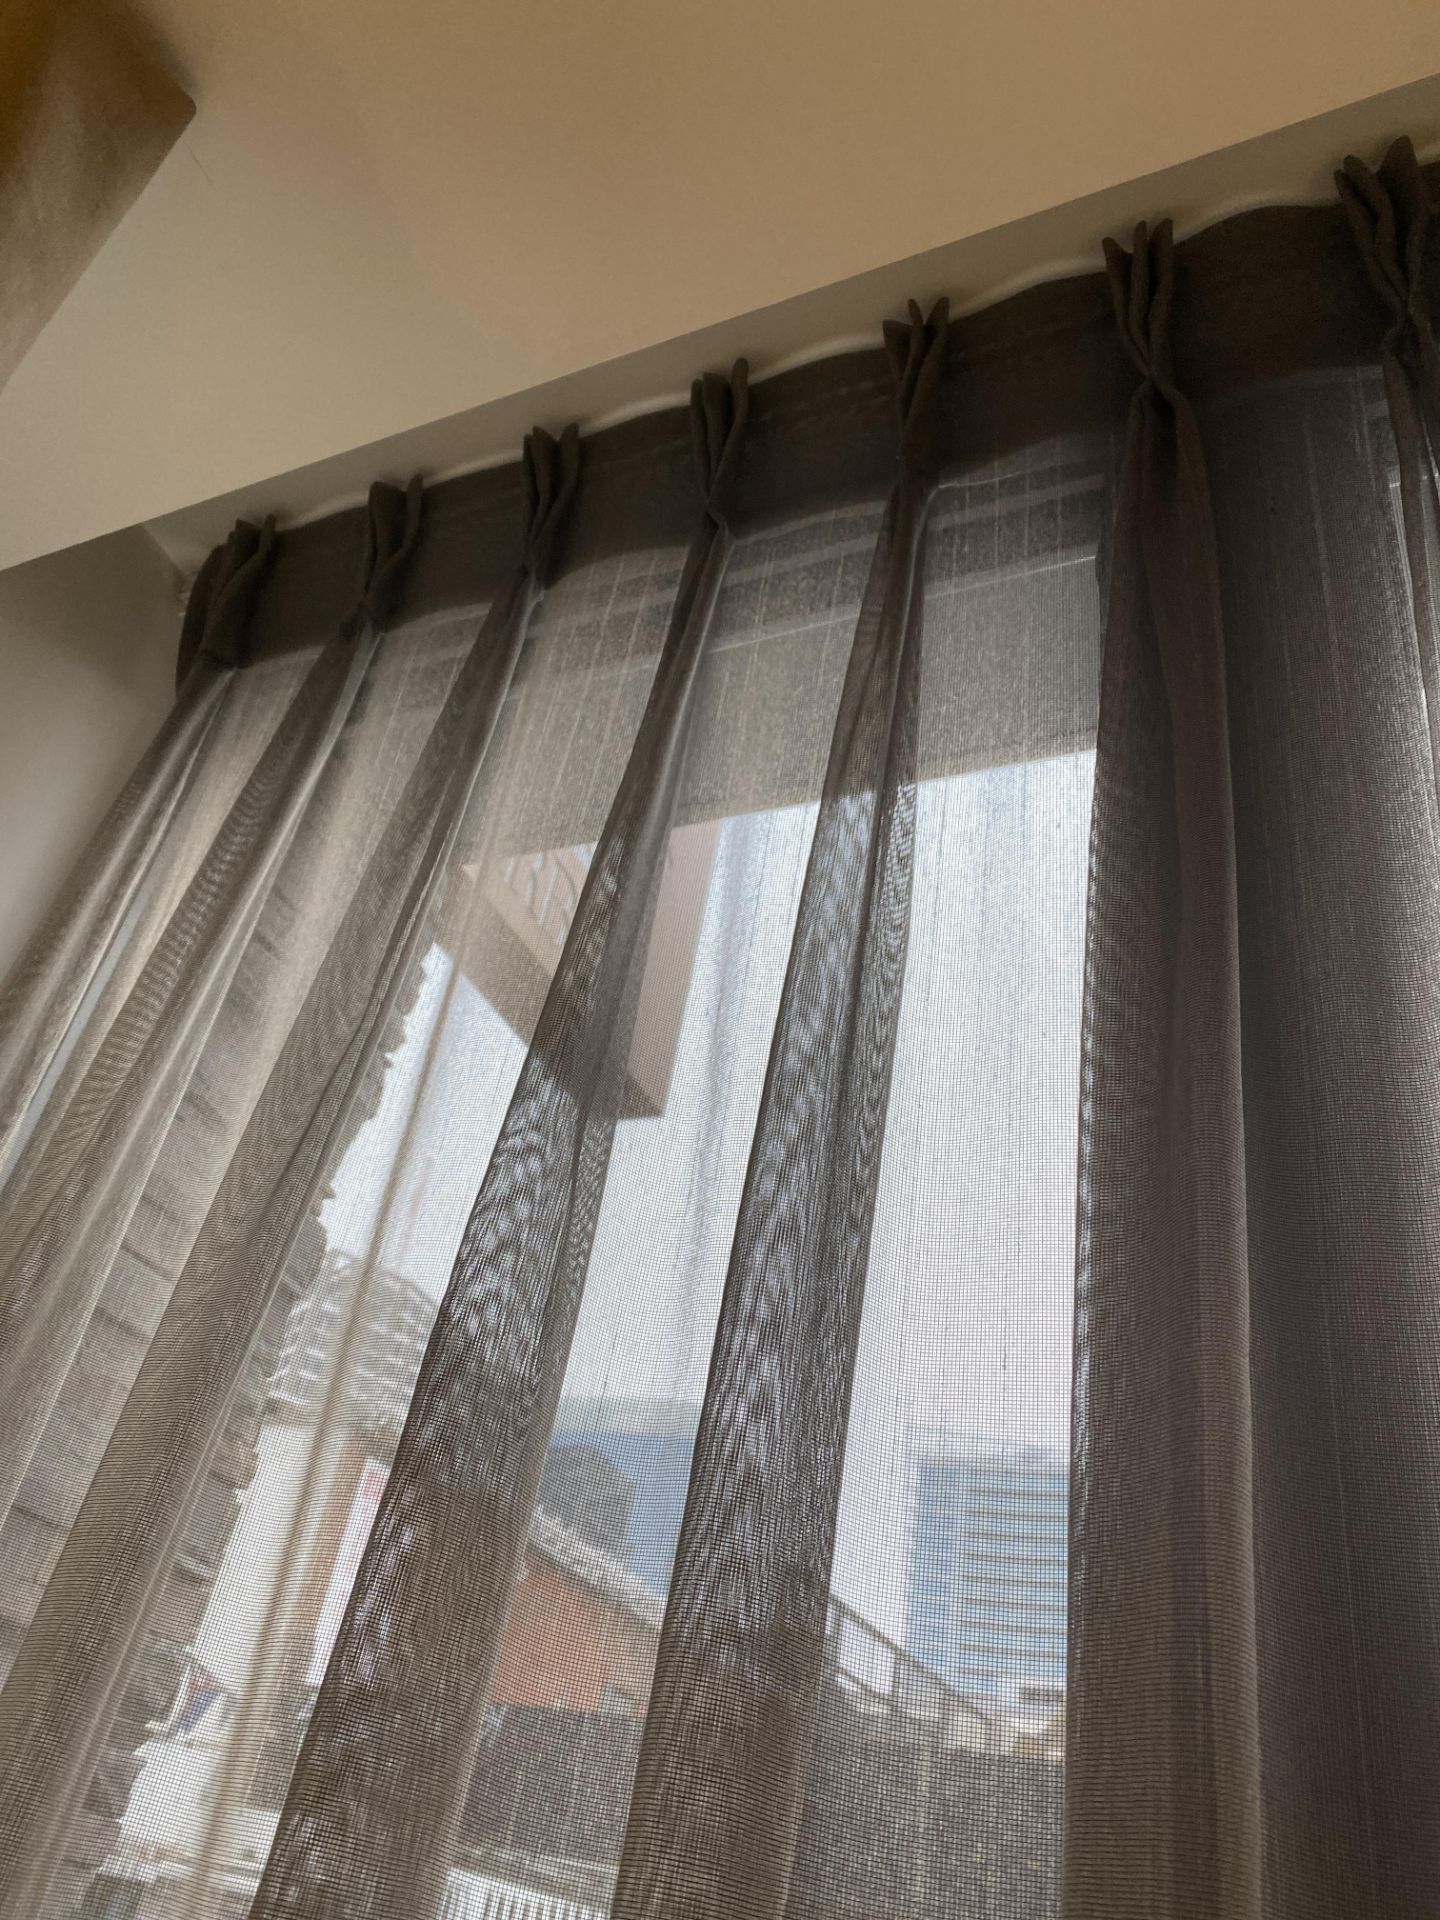 Commercial grade luxury blackout curtains - Image 2 of 5